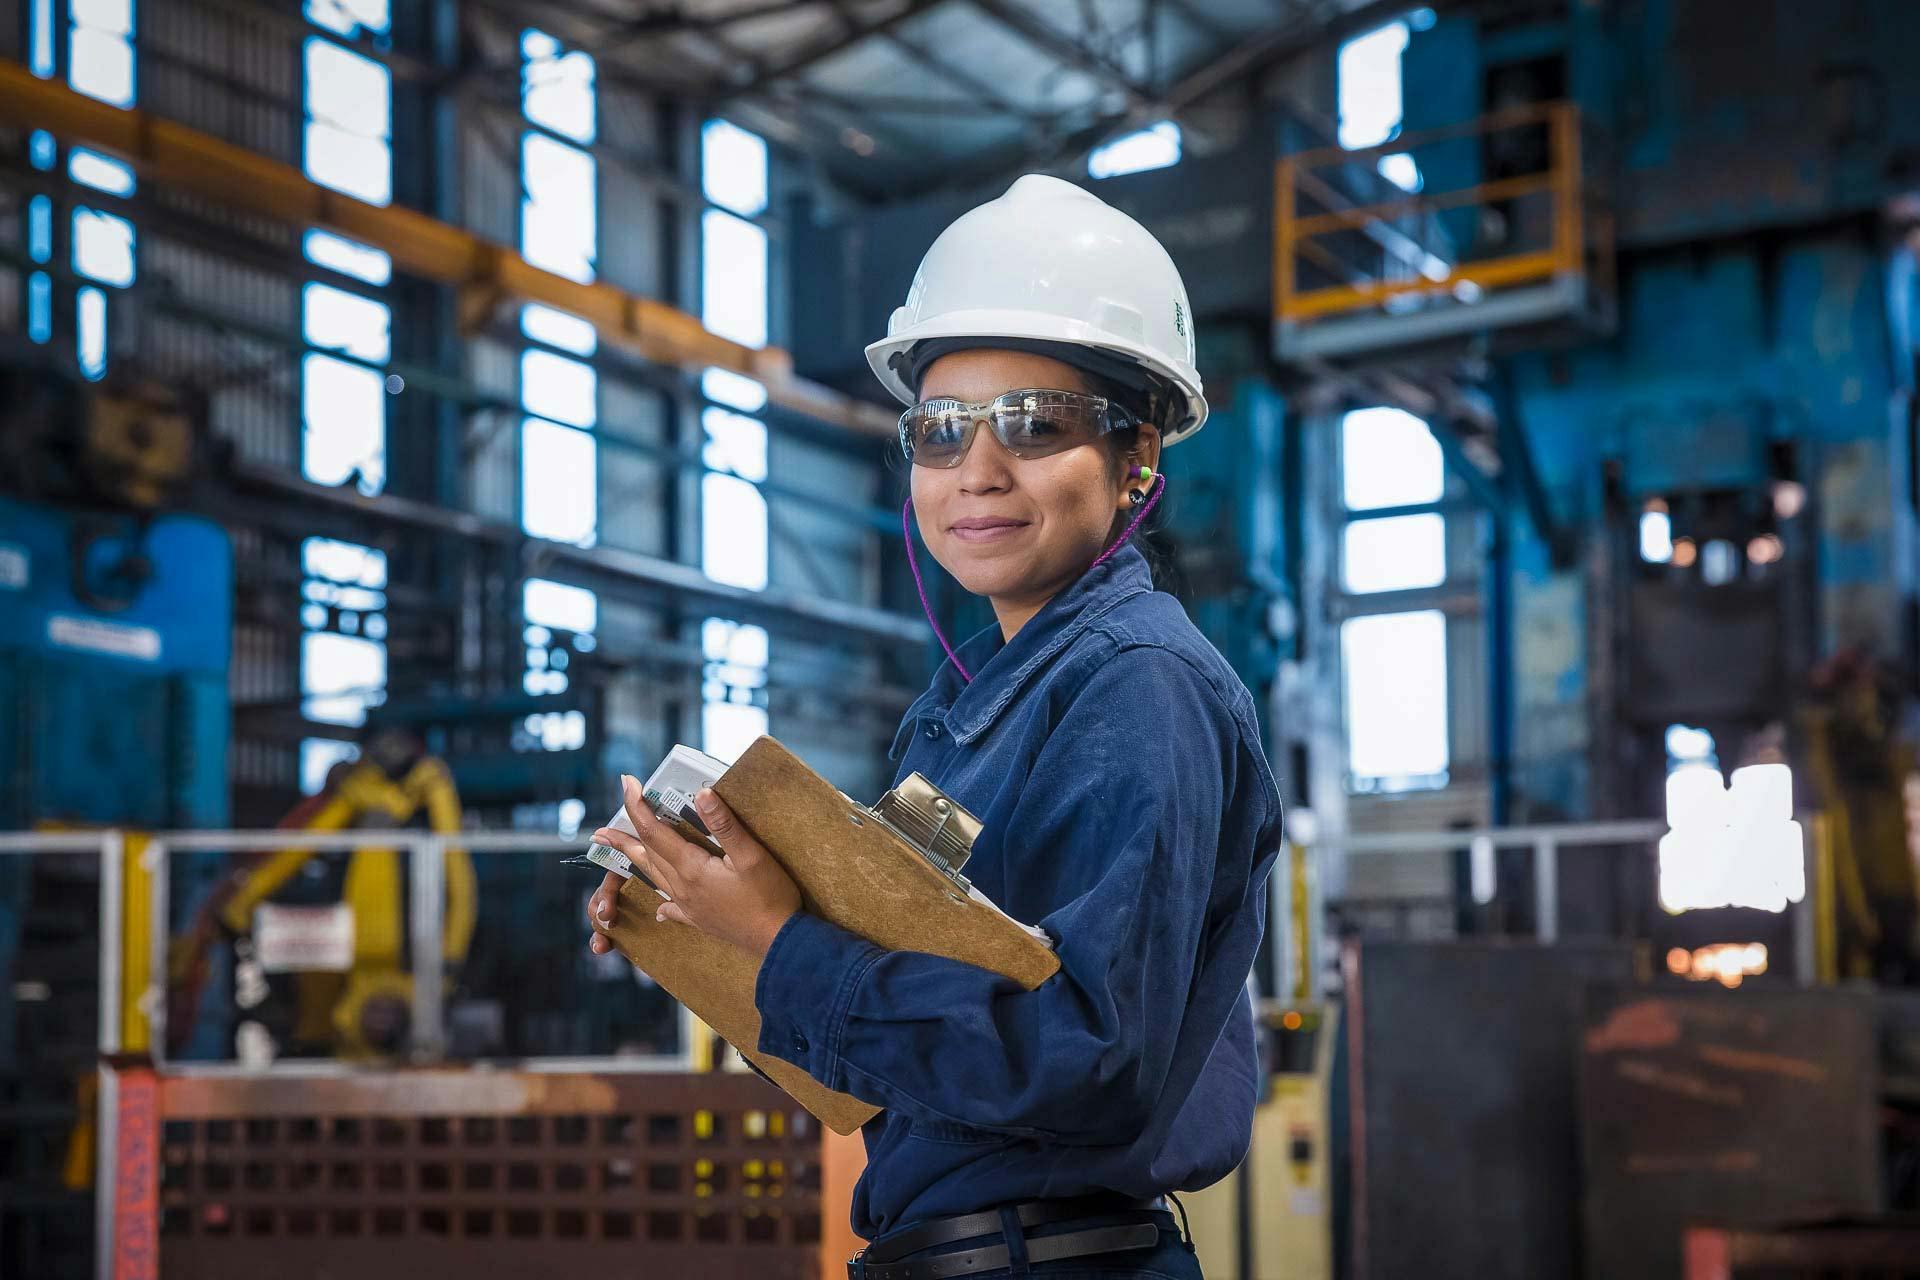 A worker smiles while holding a clipboard in a manufacturing facility